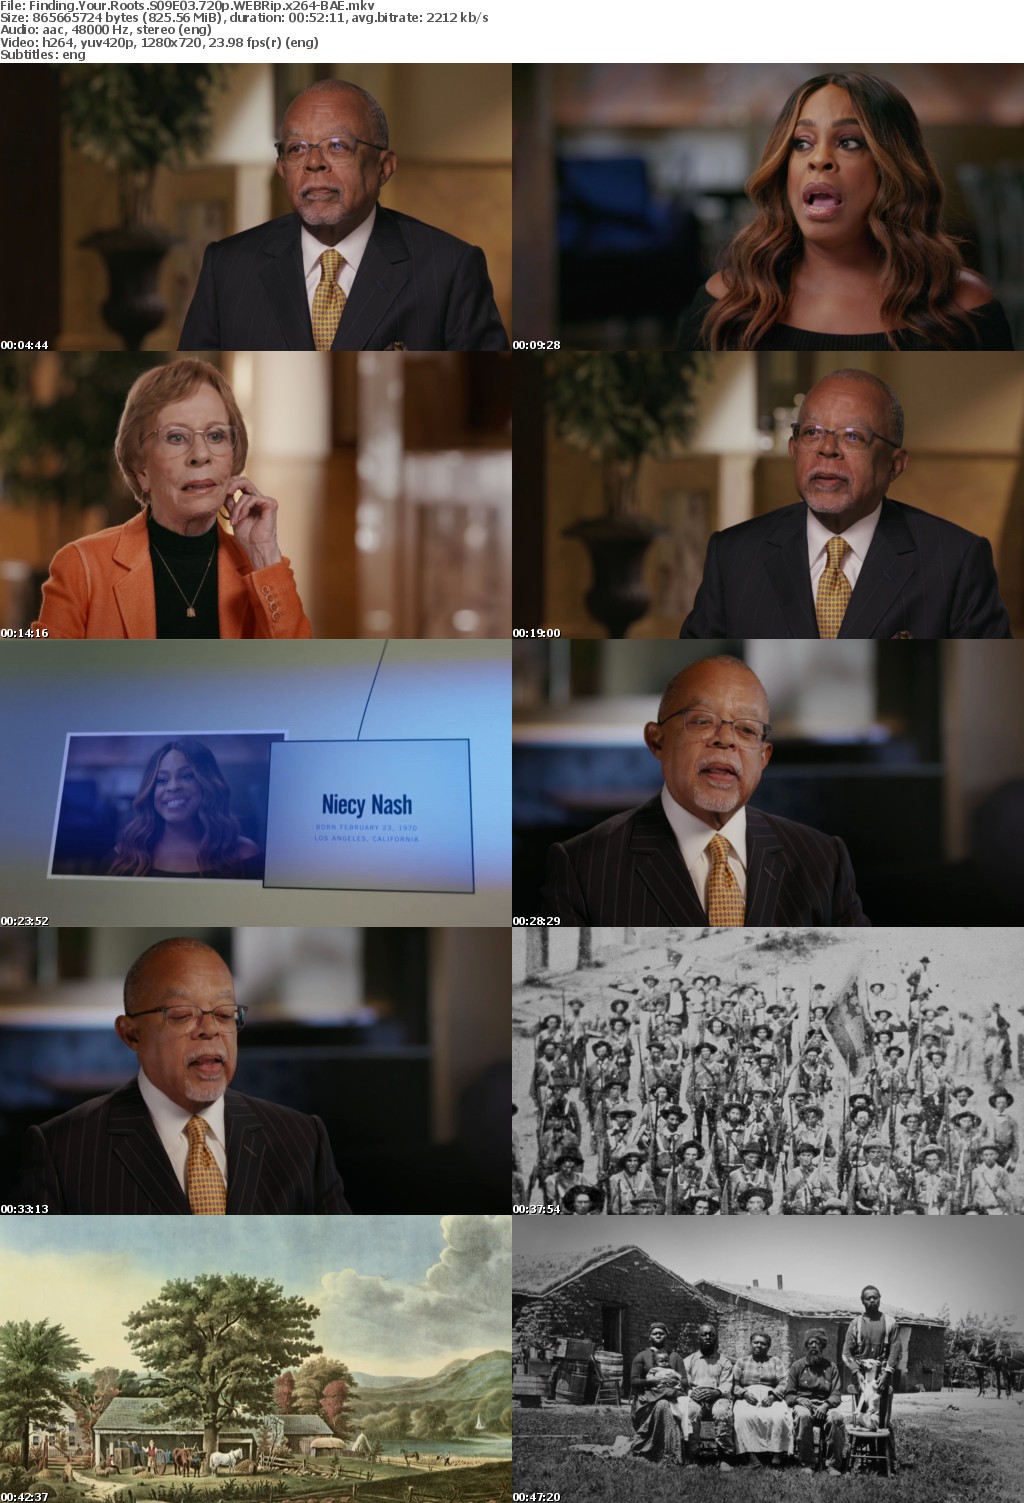 Finding Your Roots S09E03 720p WEBRip x264-BAE